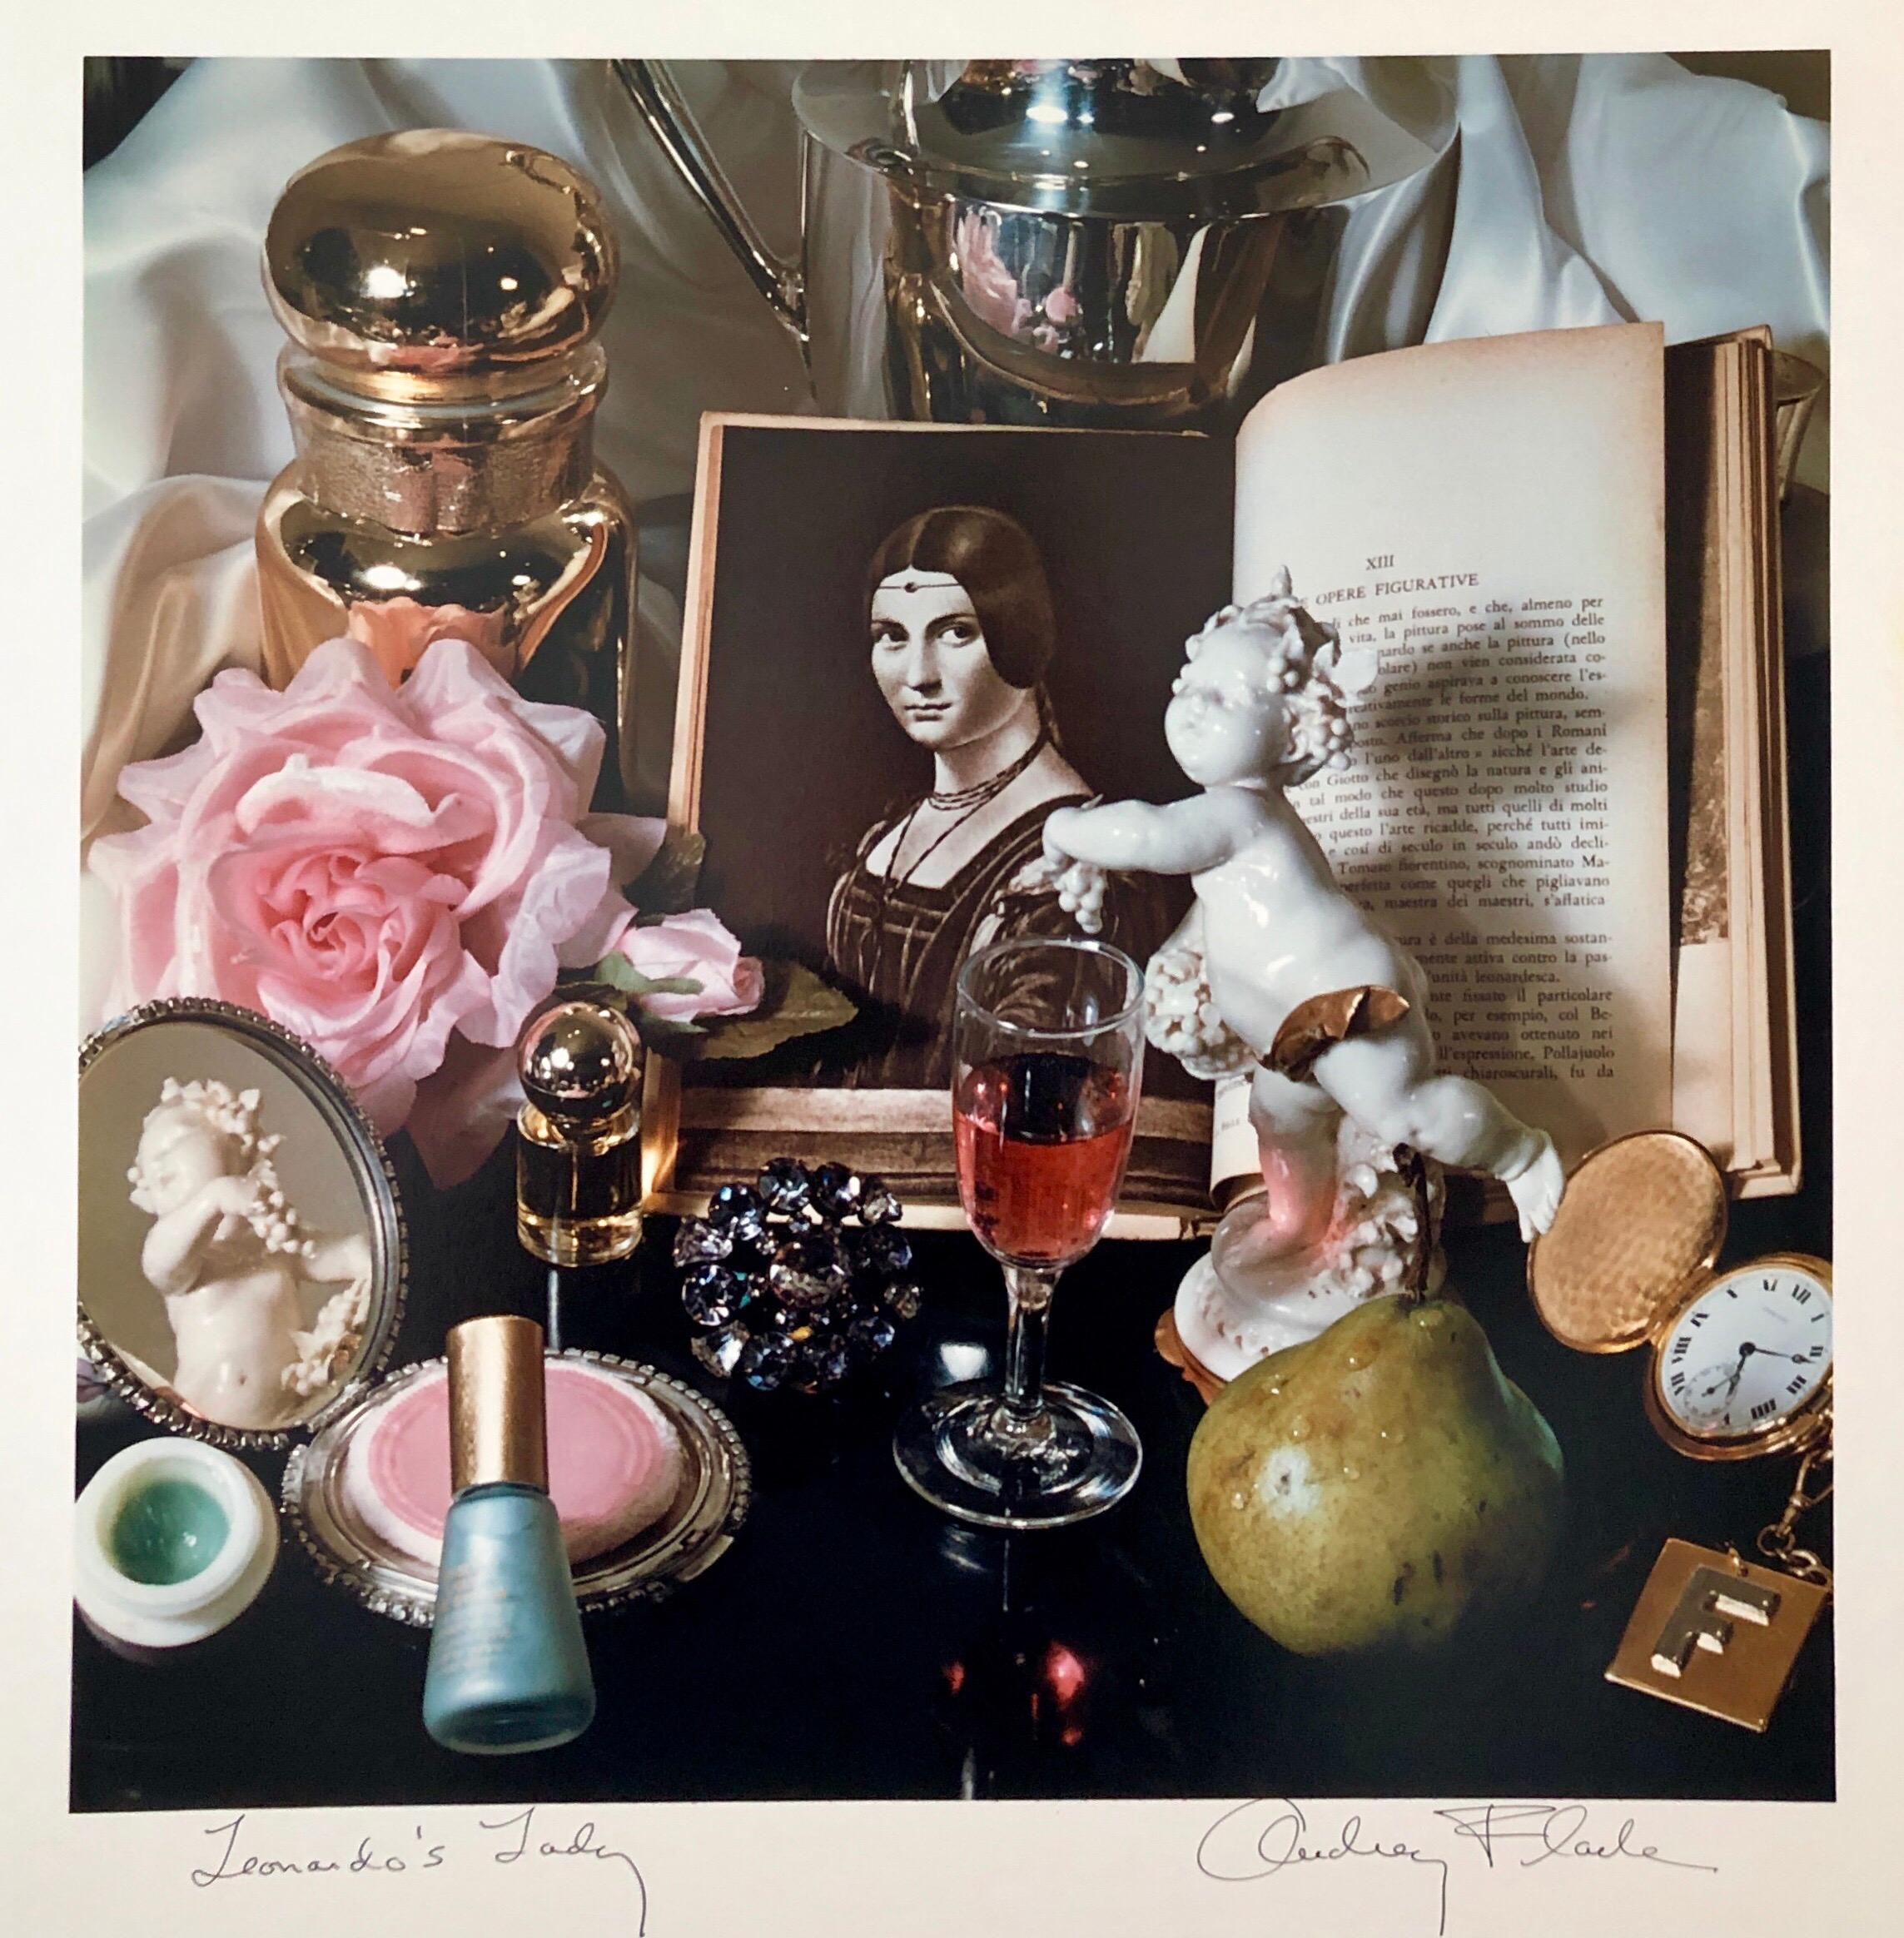 Hand signed and titled in ink by the artist from edition of 50 (plus proofs). Color Photo printed at CVI Lab by master printer Guy Stricherz. Published by Prestige Art Ltd. From the color saturated 1980's. A portrait by Leonardo da Vinci, nail